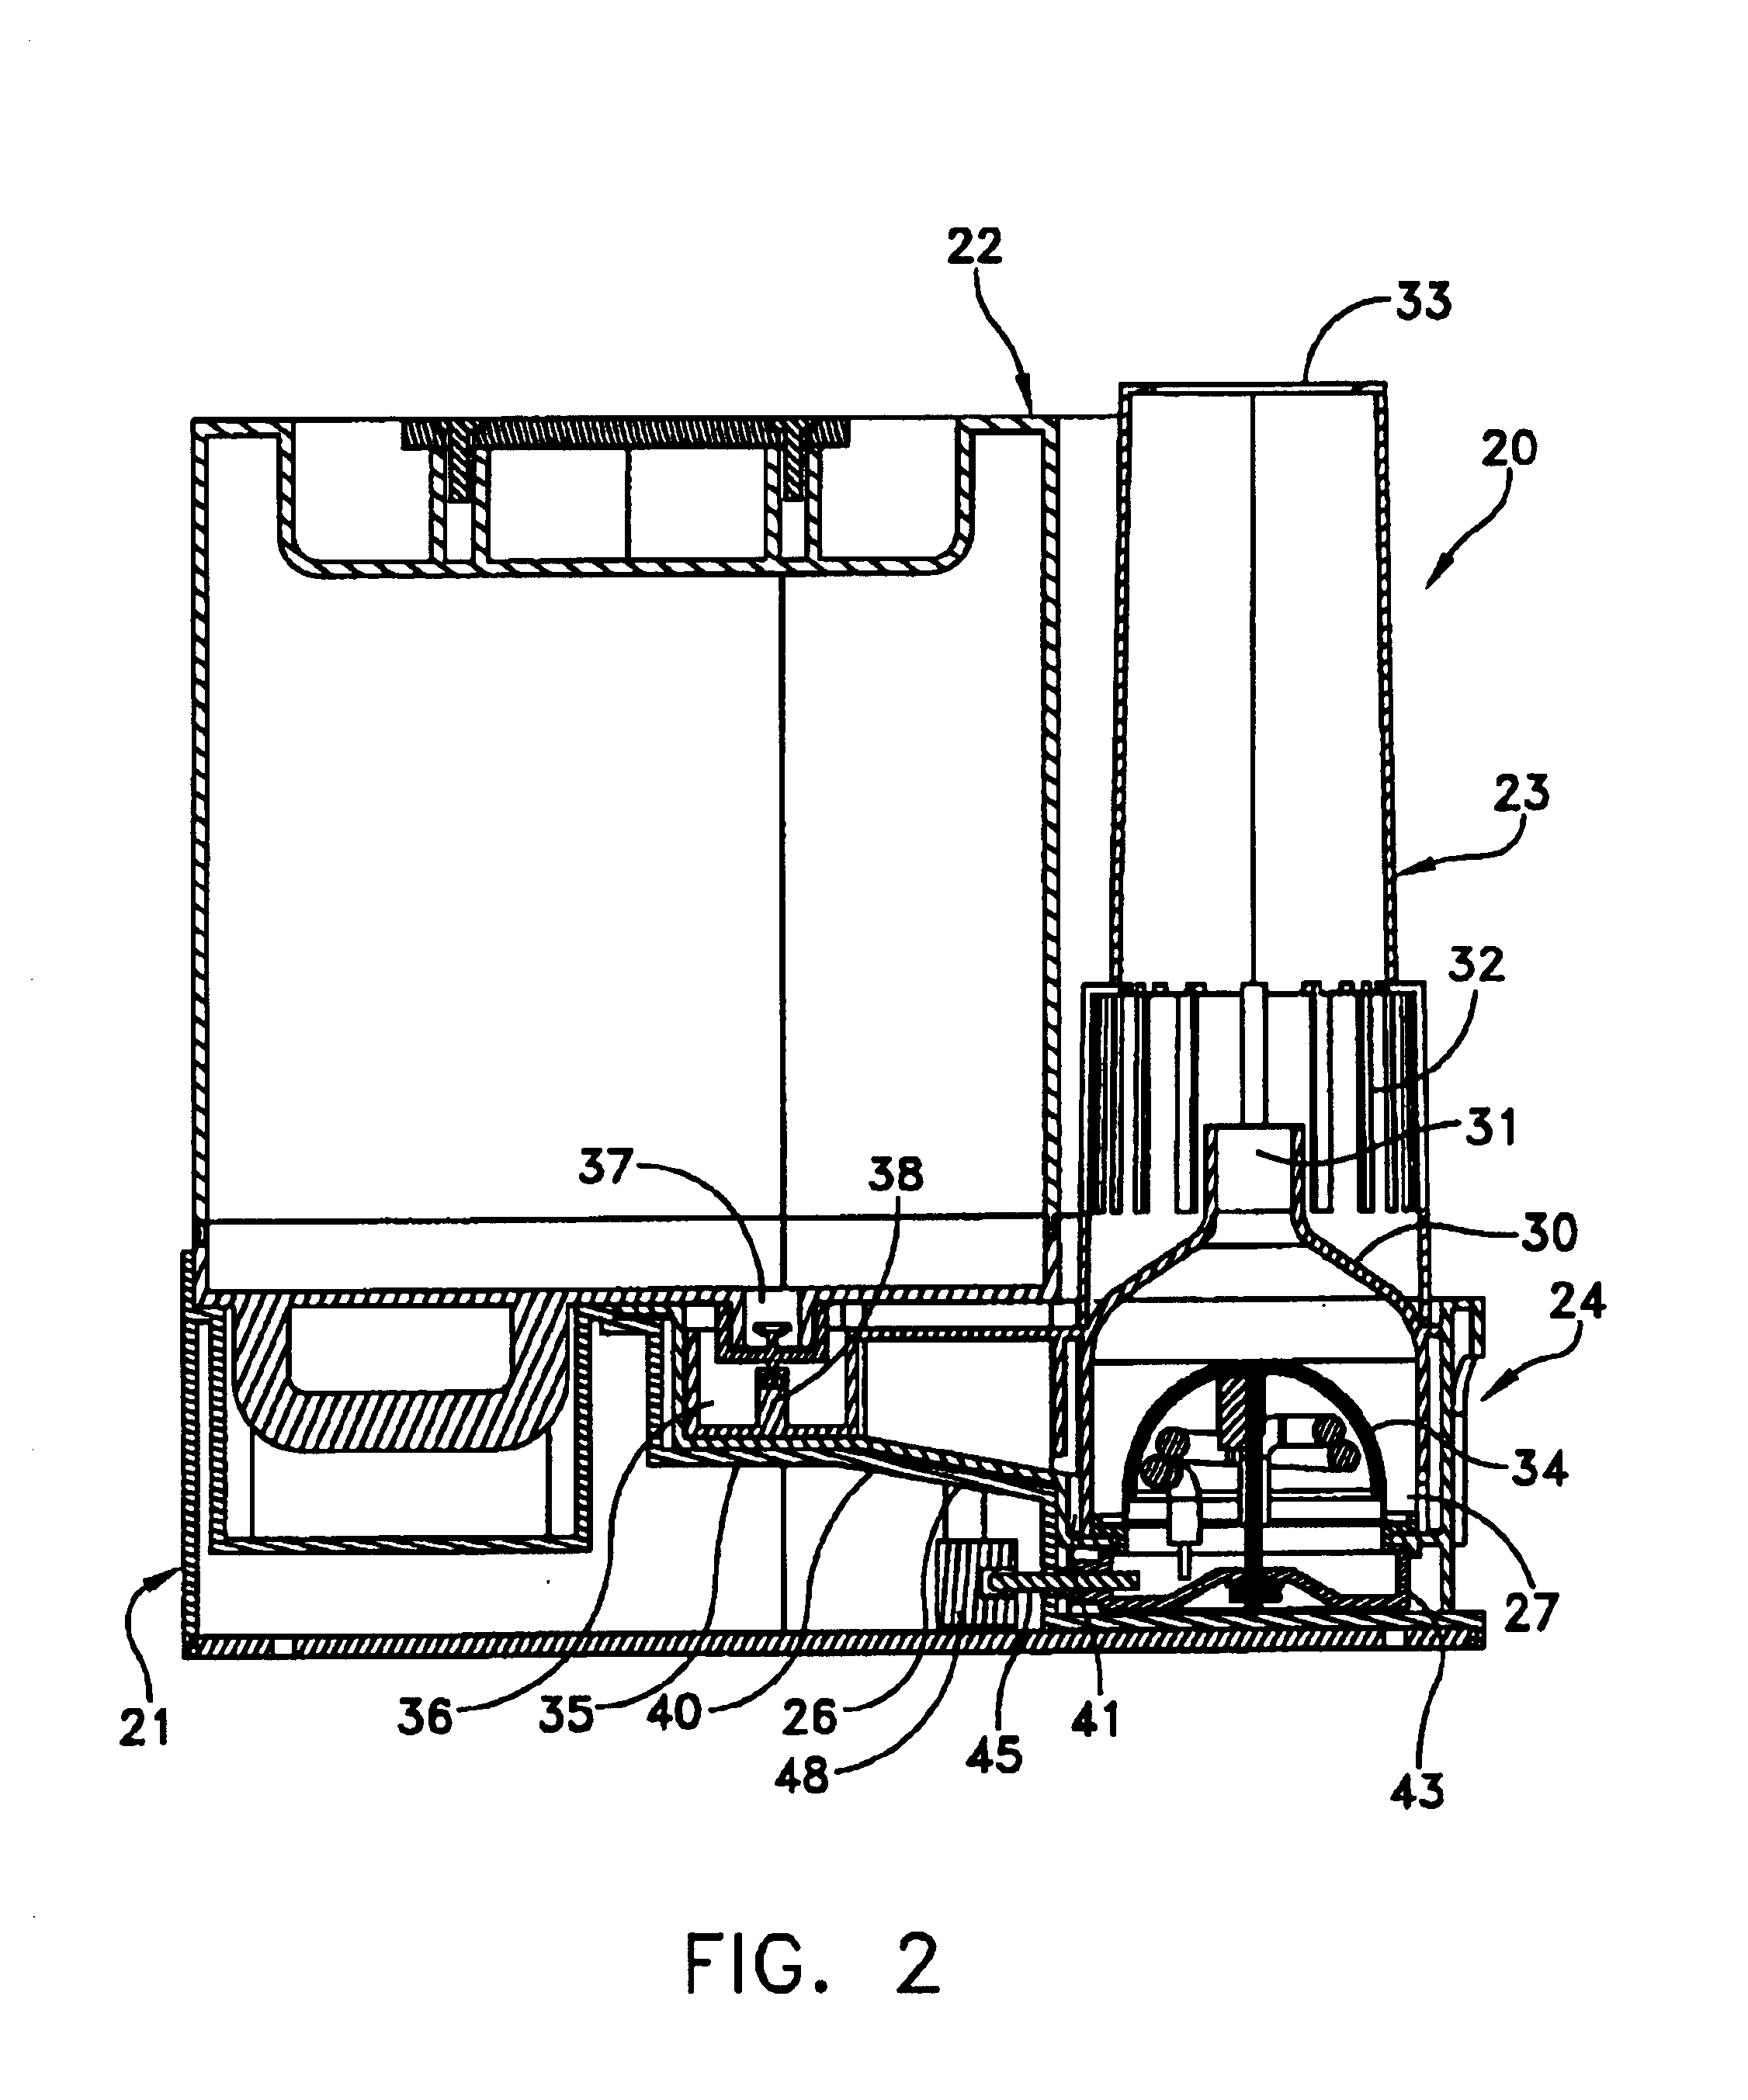 Apparatus for conditioning air